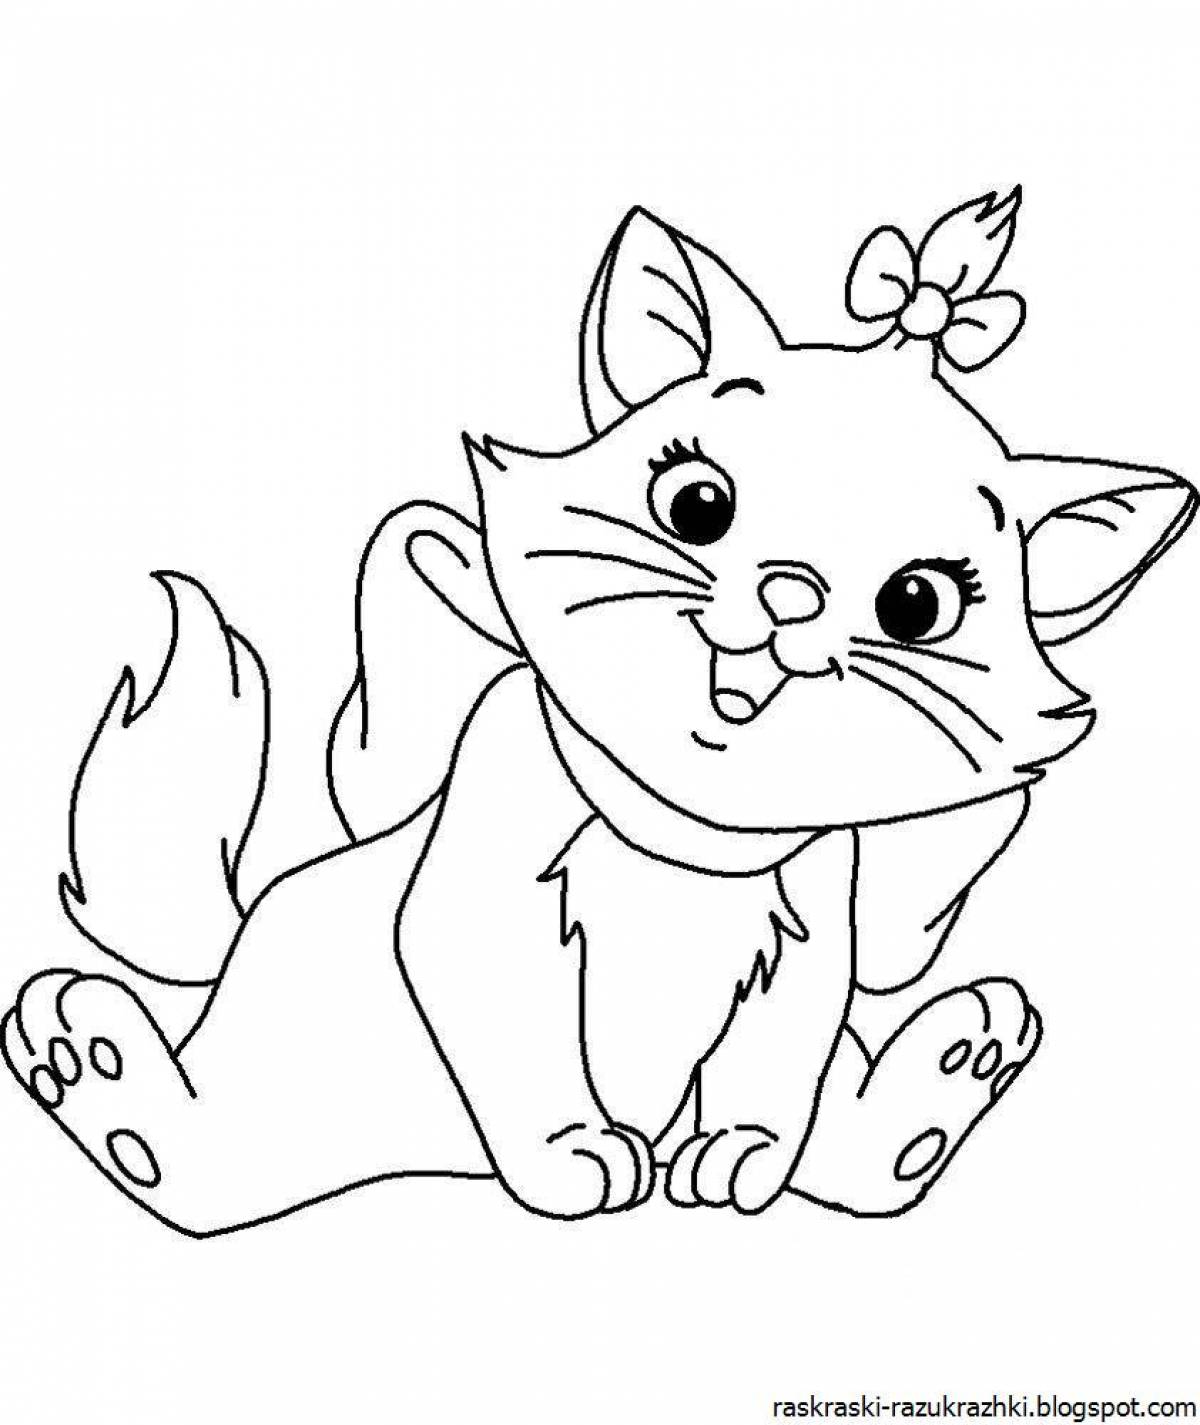 Fun coloring cat for children 6-7 years old